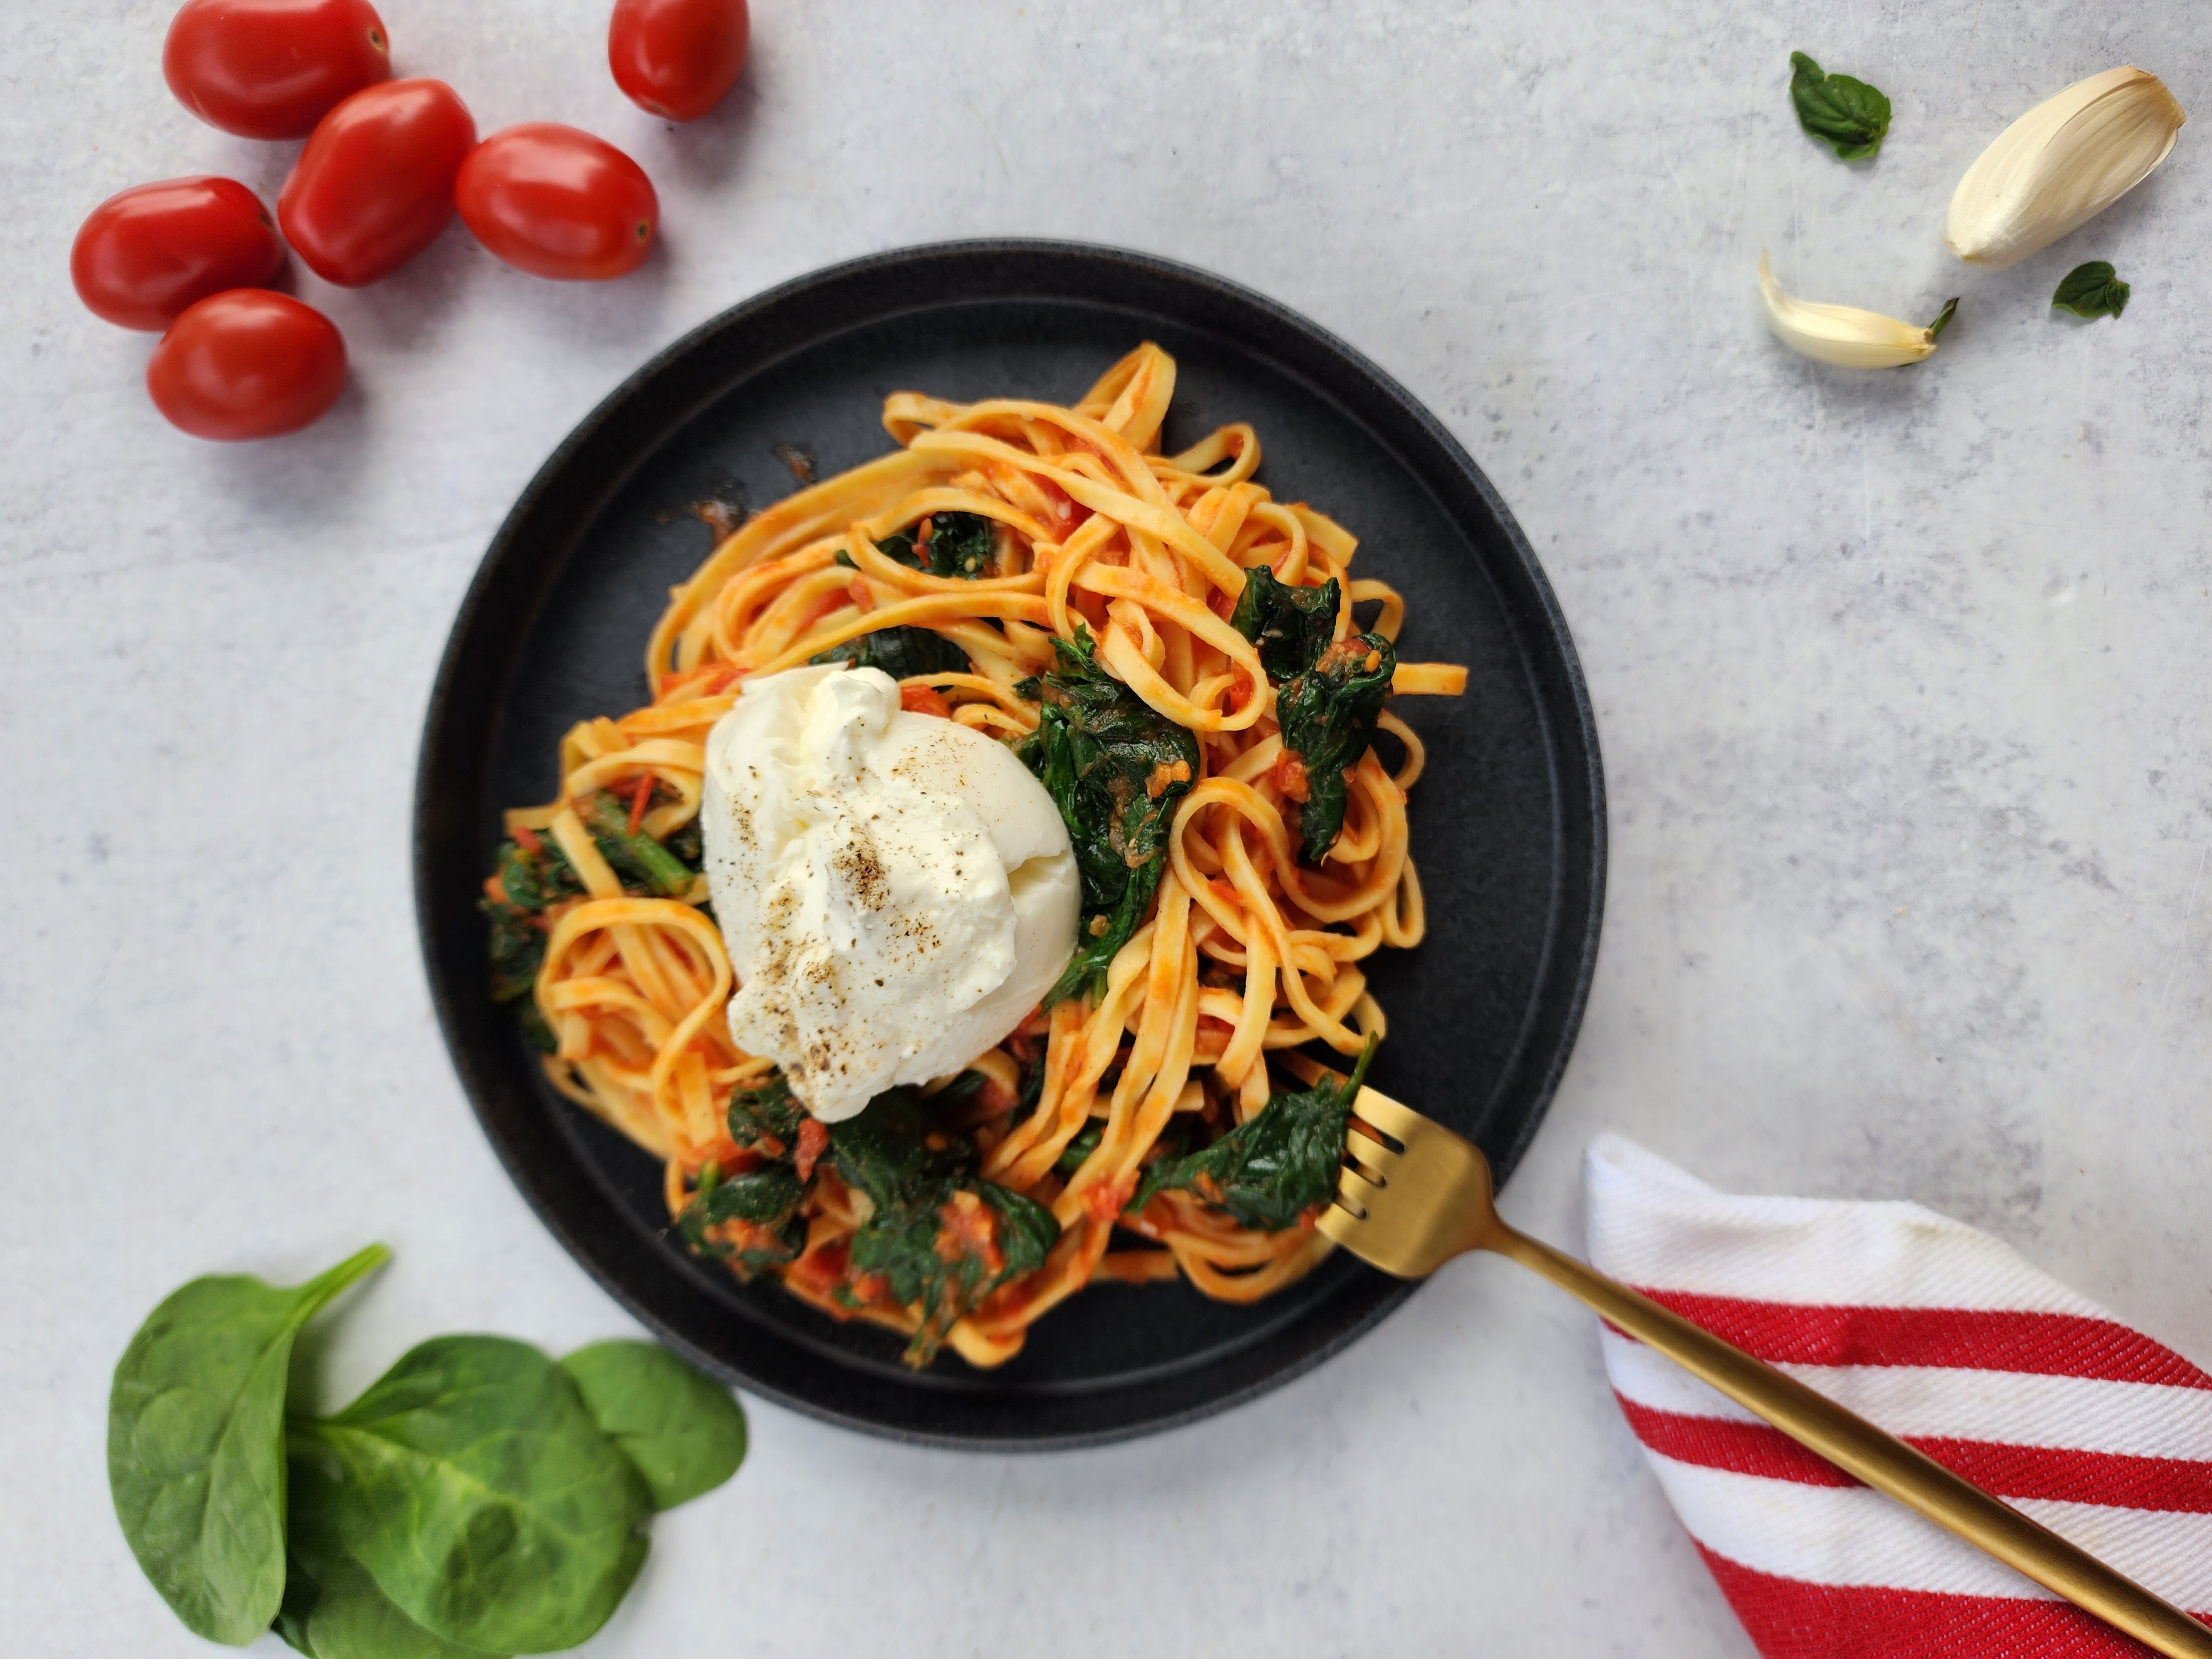 Plate of Burrata Pasta with Spinach